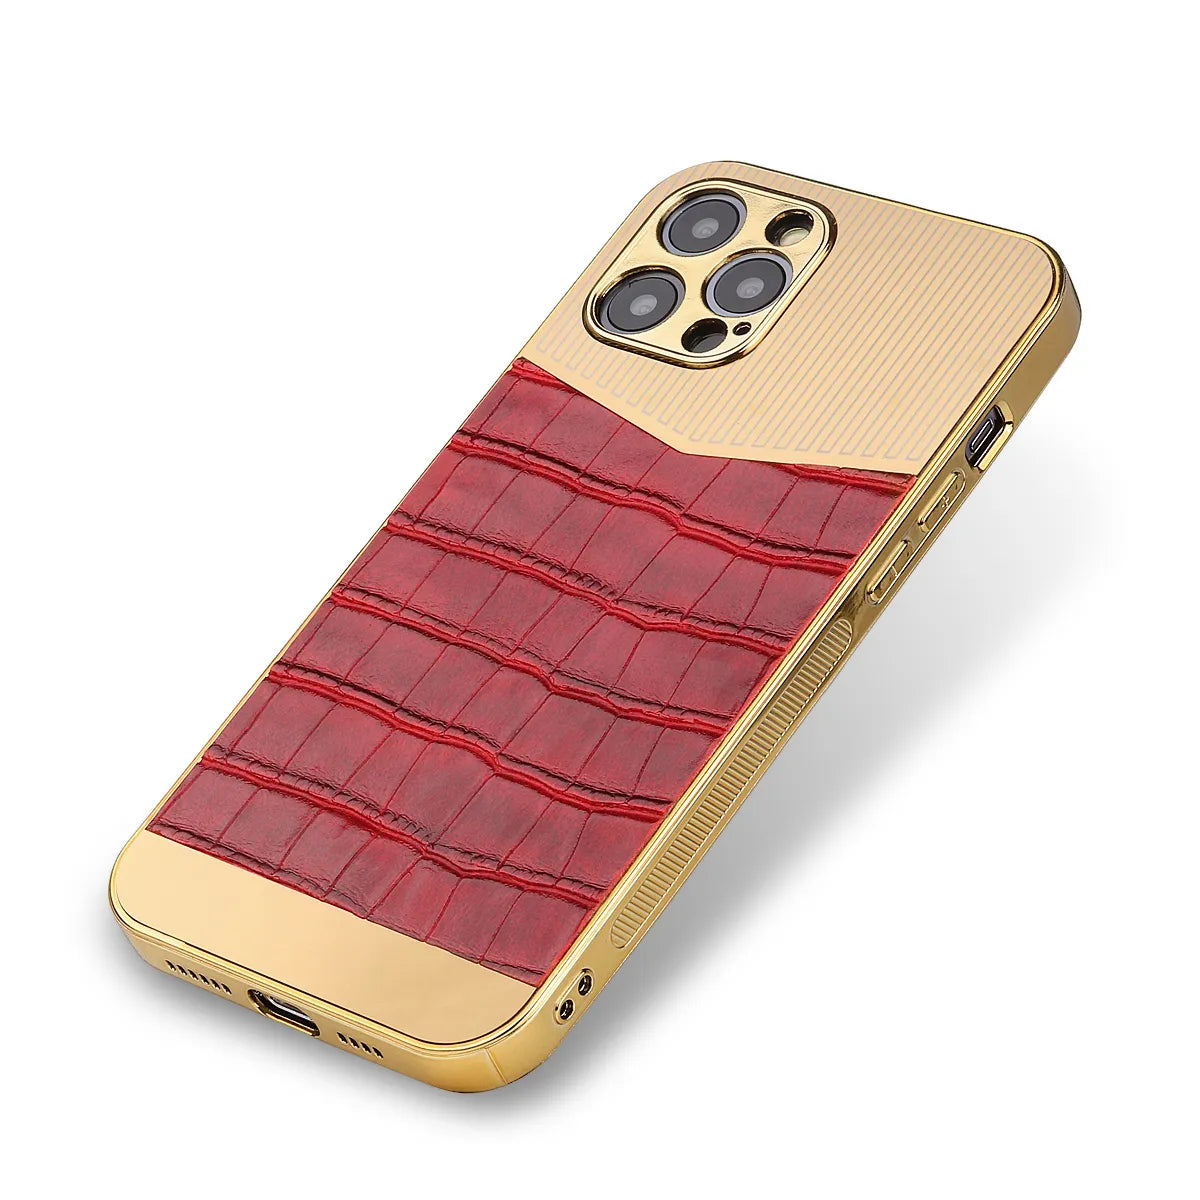 Luxury Aluminum Stainless Frame Leather Cover For All iPhone - gold red / For iPhone 12 - sky-cover